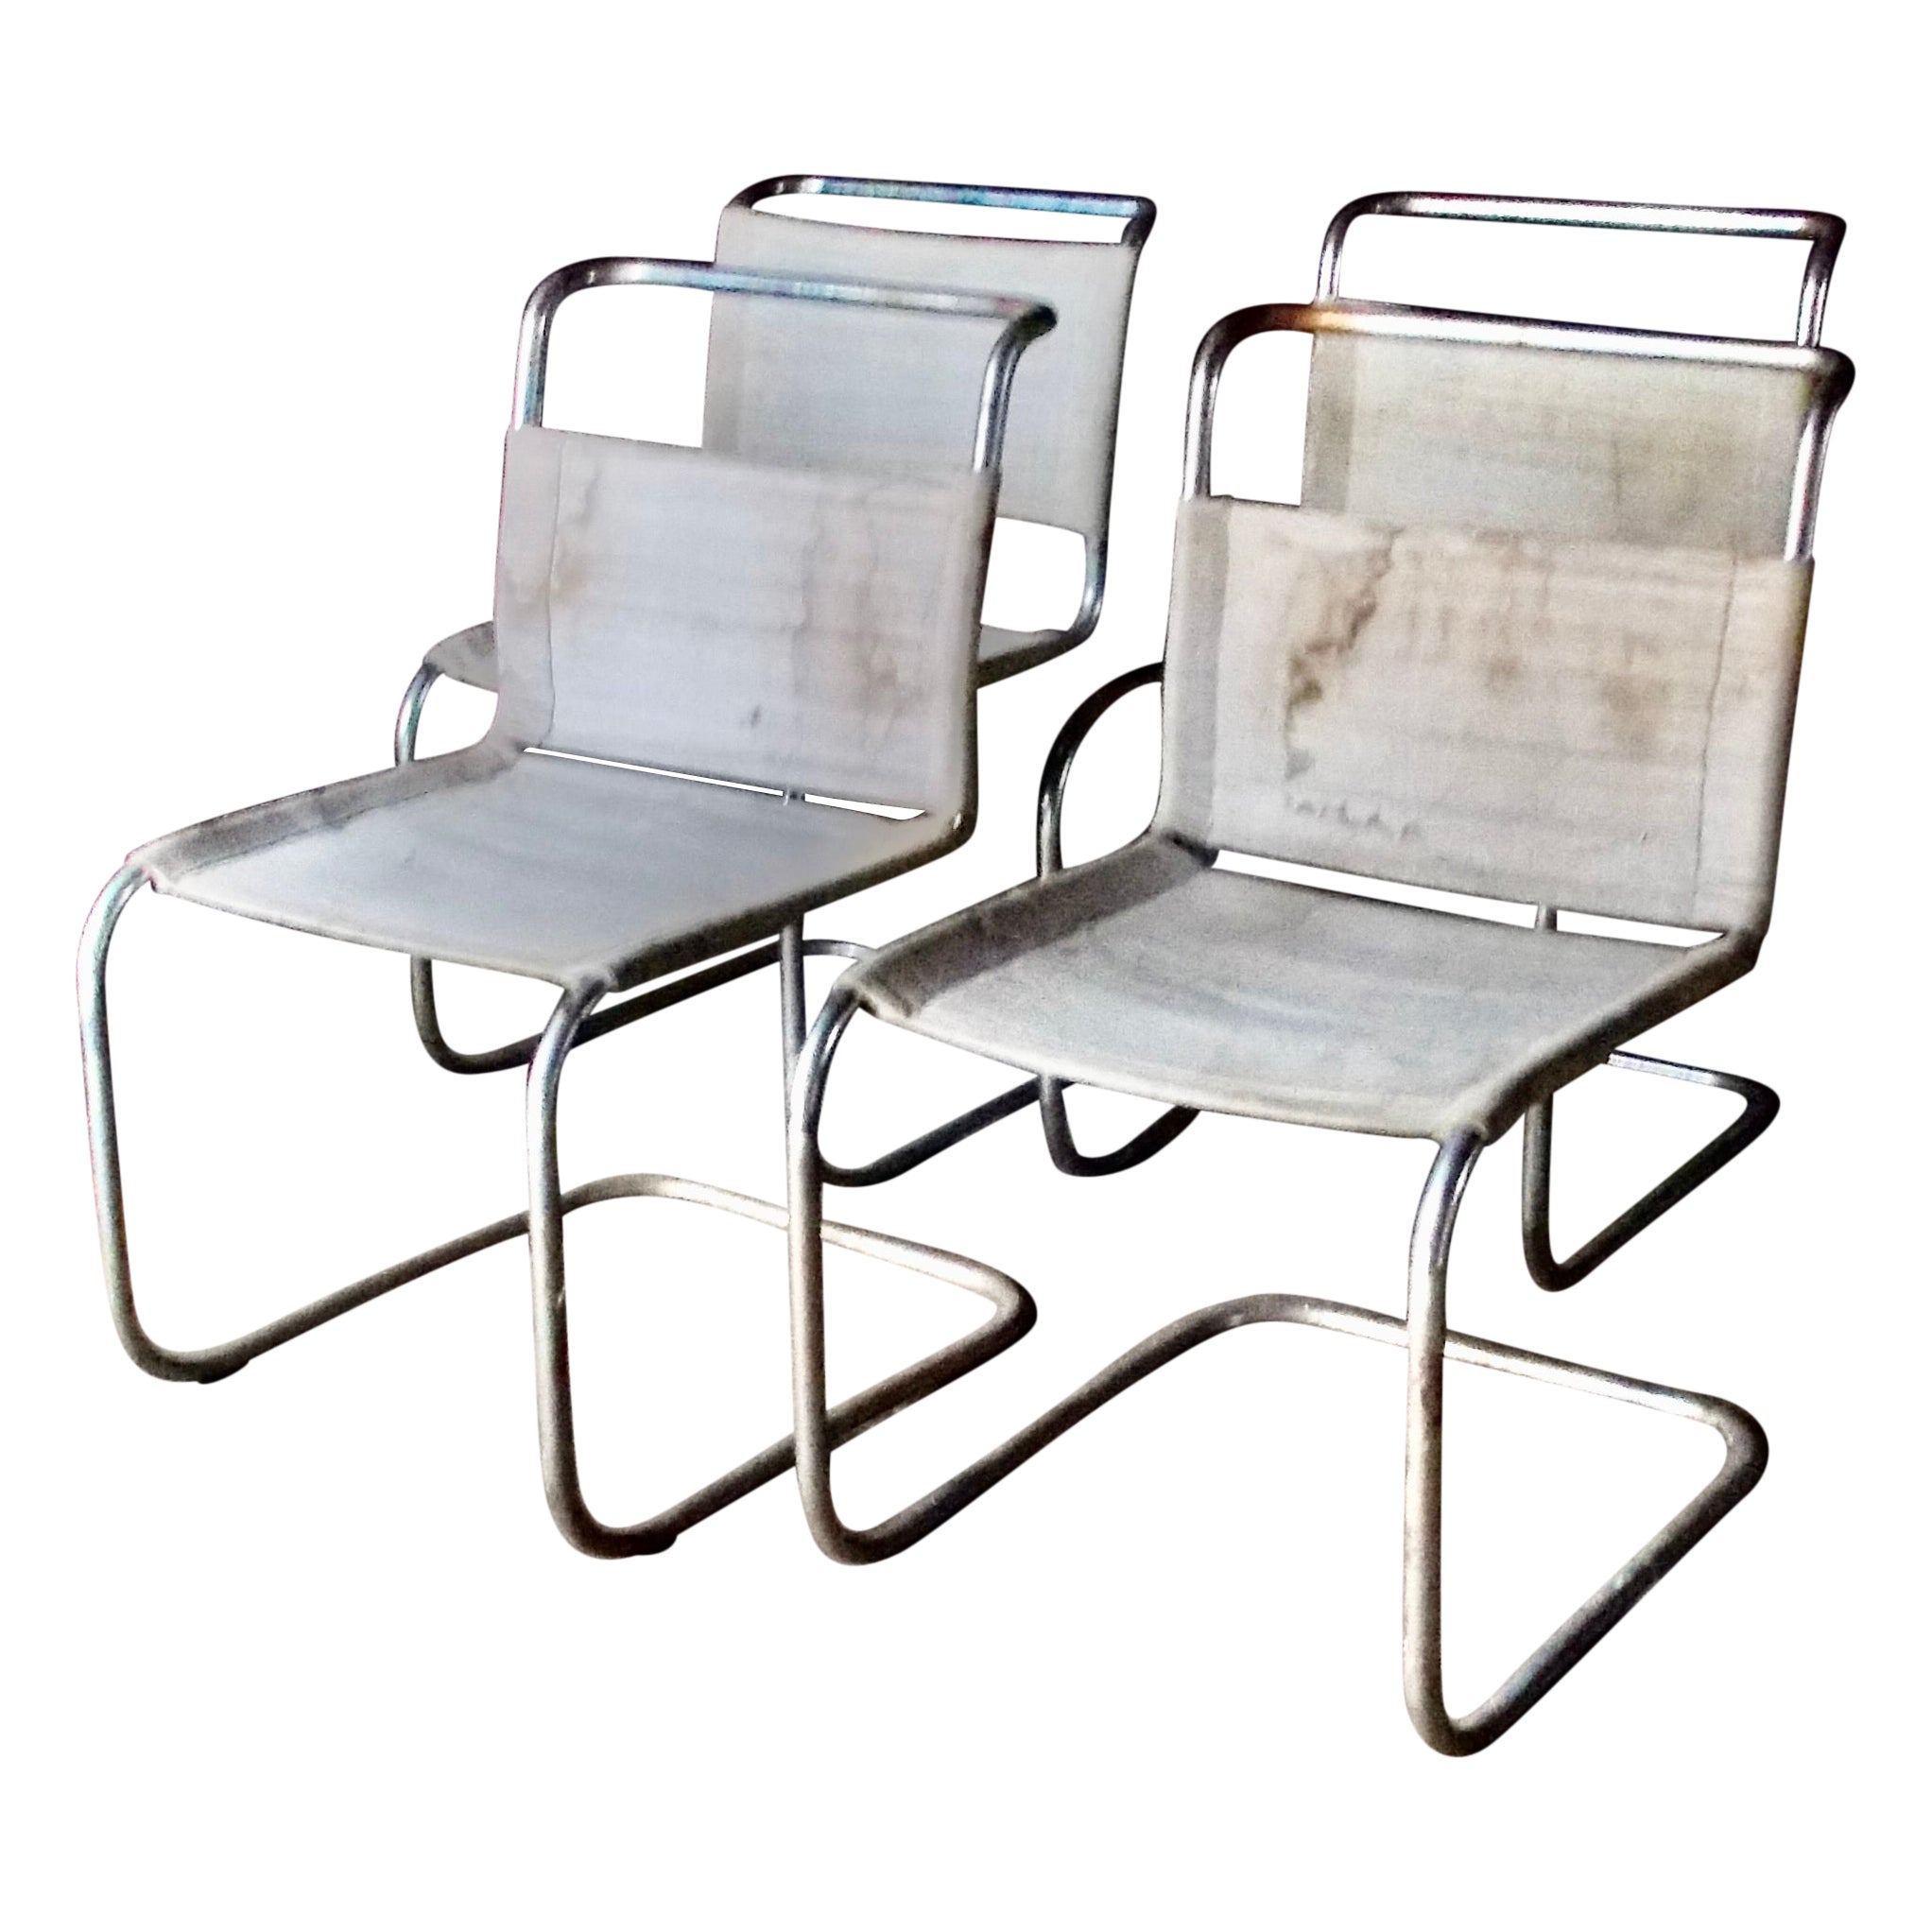 Four Early Breuer B-33 Canvas and Tubular Steel Side Chairs